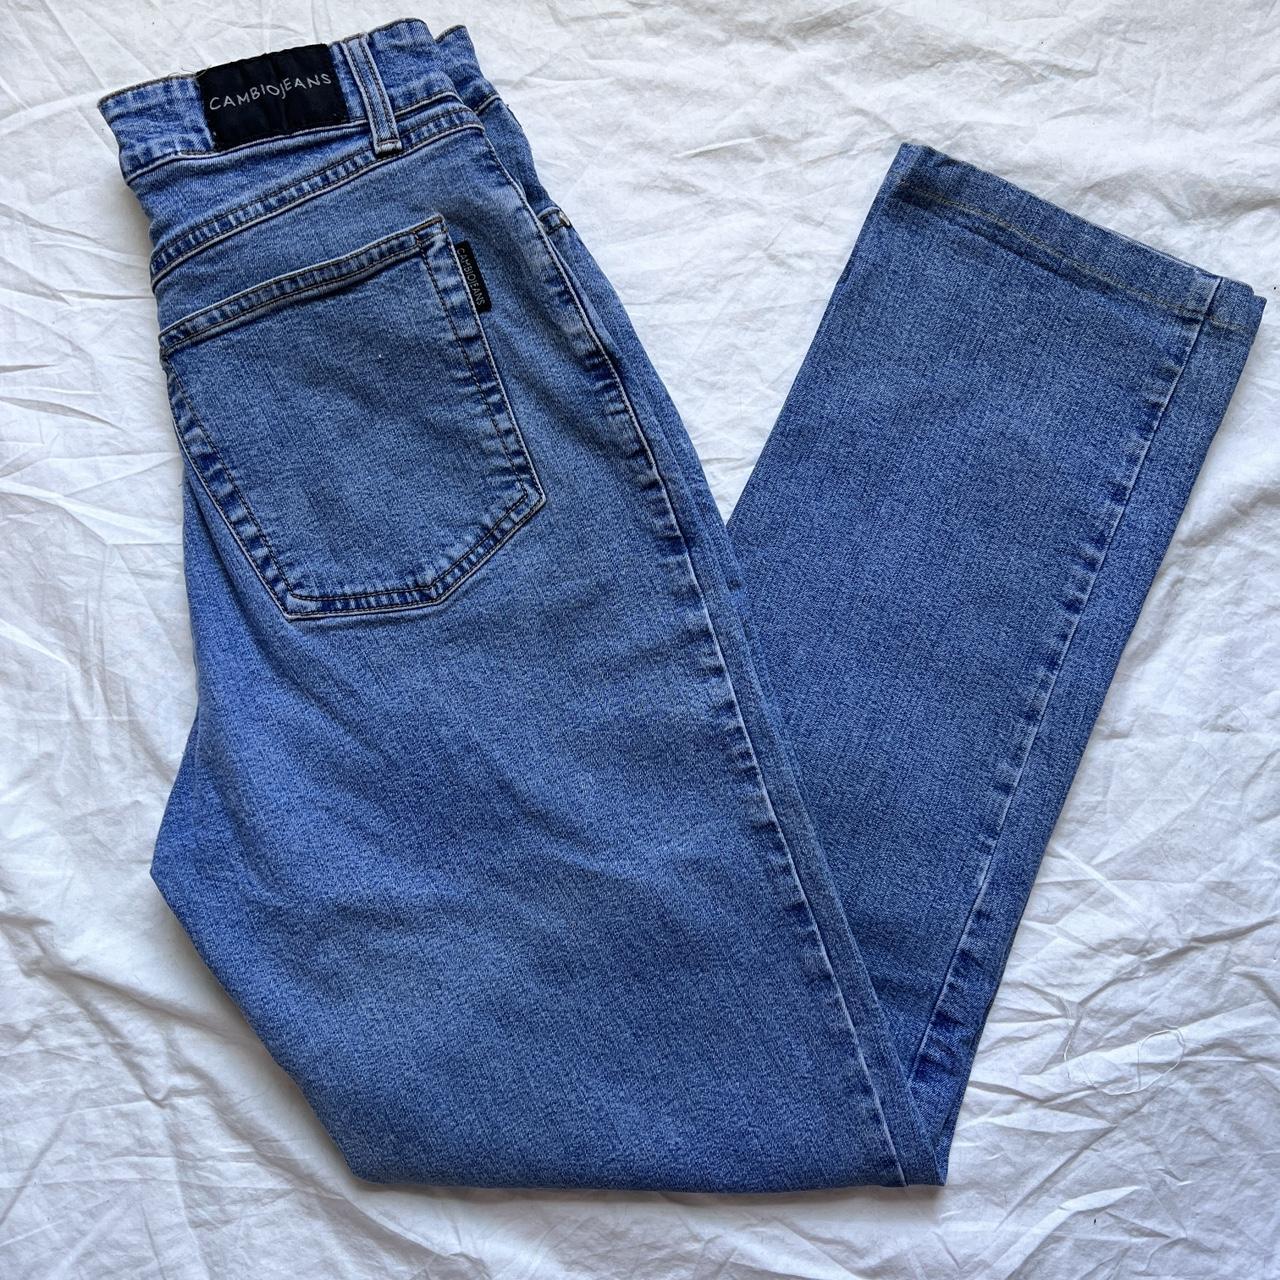 Cambio Women's Navy and Blue Jeans